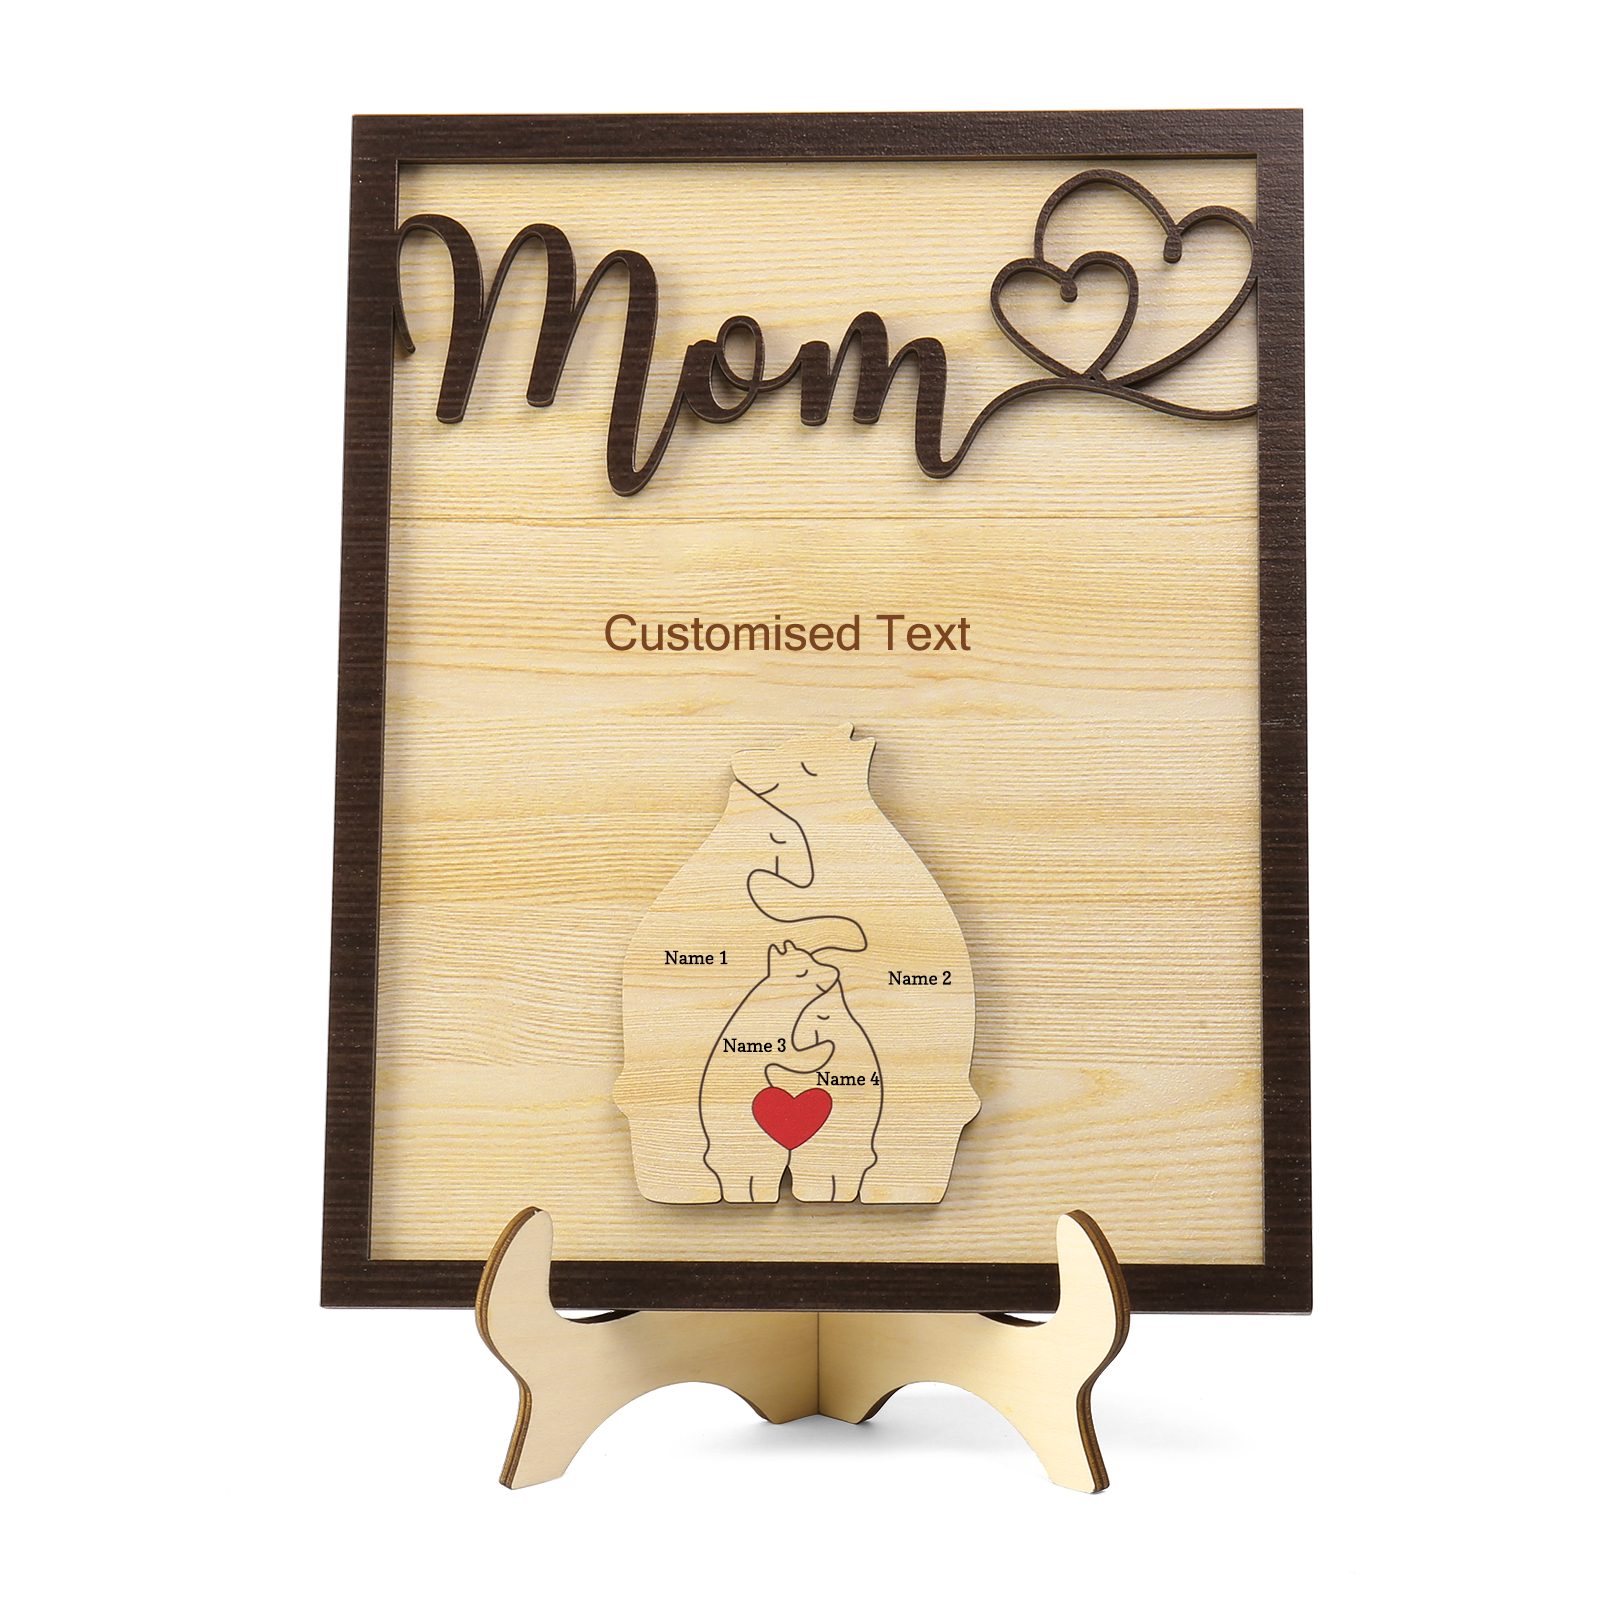 4 Names - Personalized Home Frame Wooden Ornaments Cute Bear Style Customizable 2 Text Ornaments For Mom